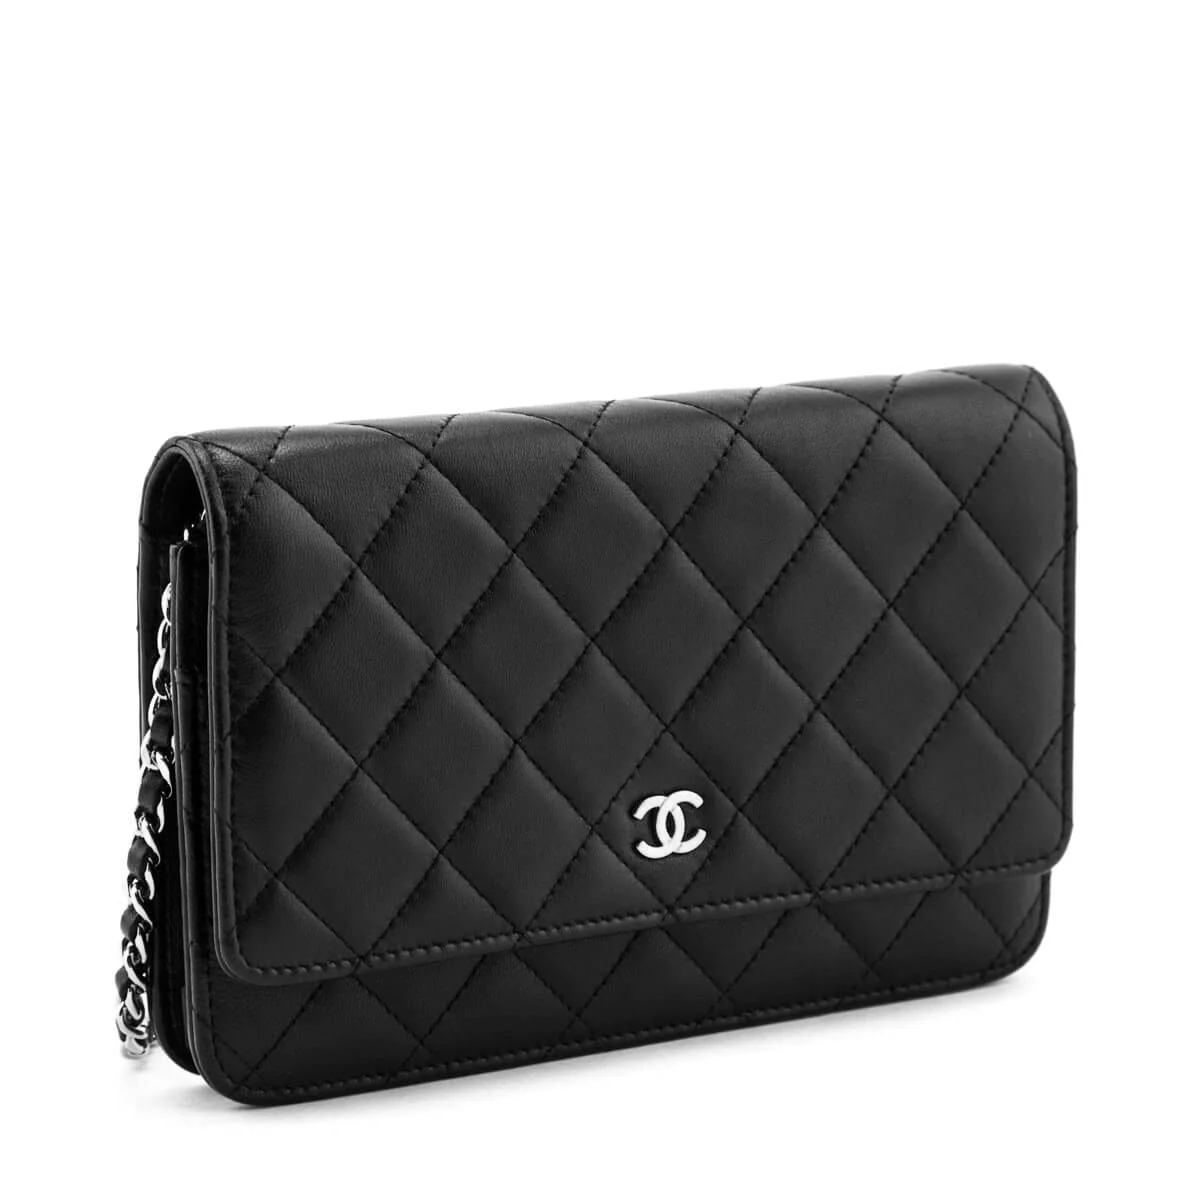 CHANEL Chanel Lambskin Leather Wallet on Chain Black with Silver Hardware - Vault 55